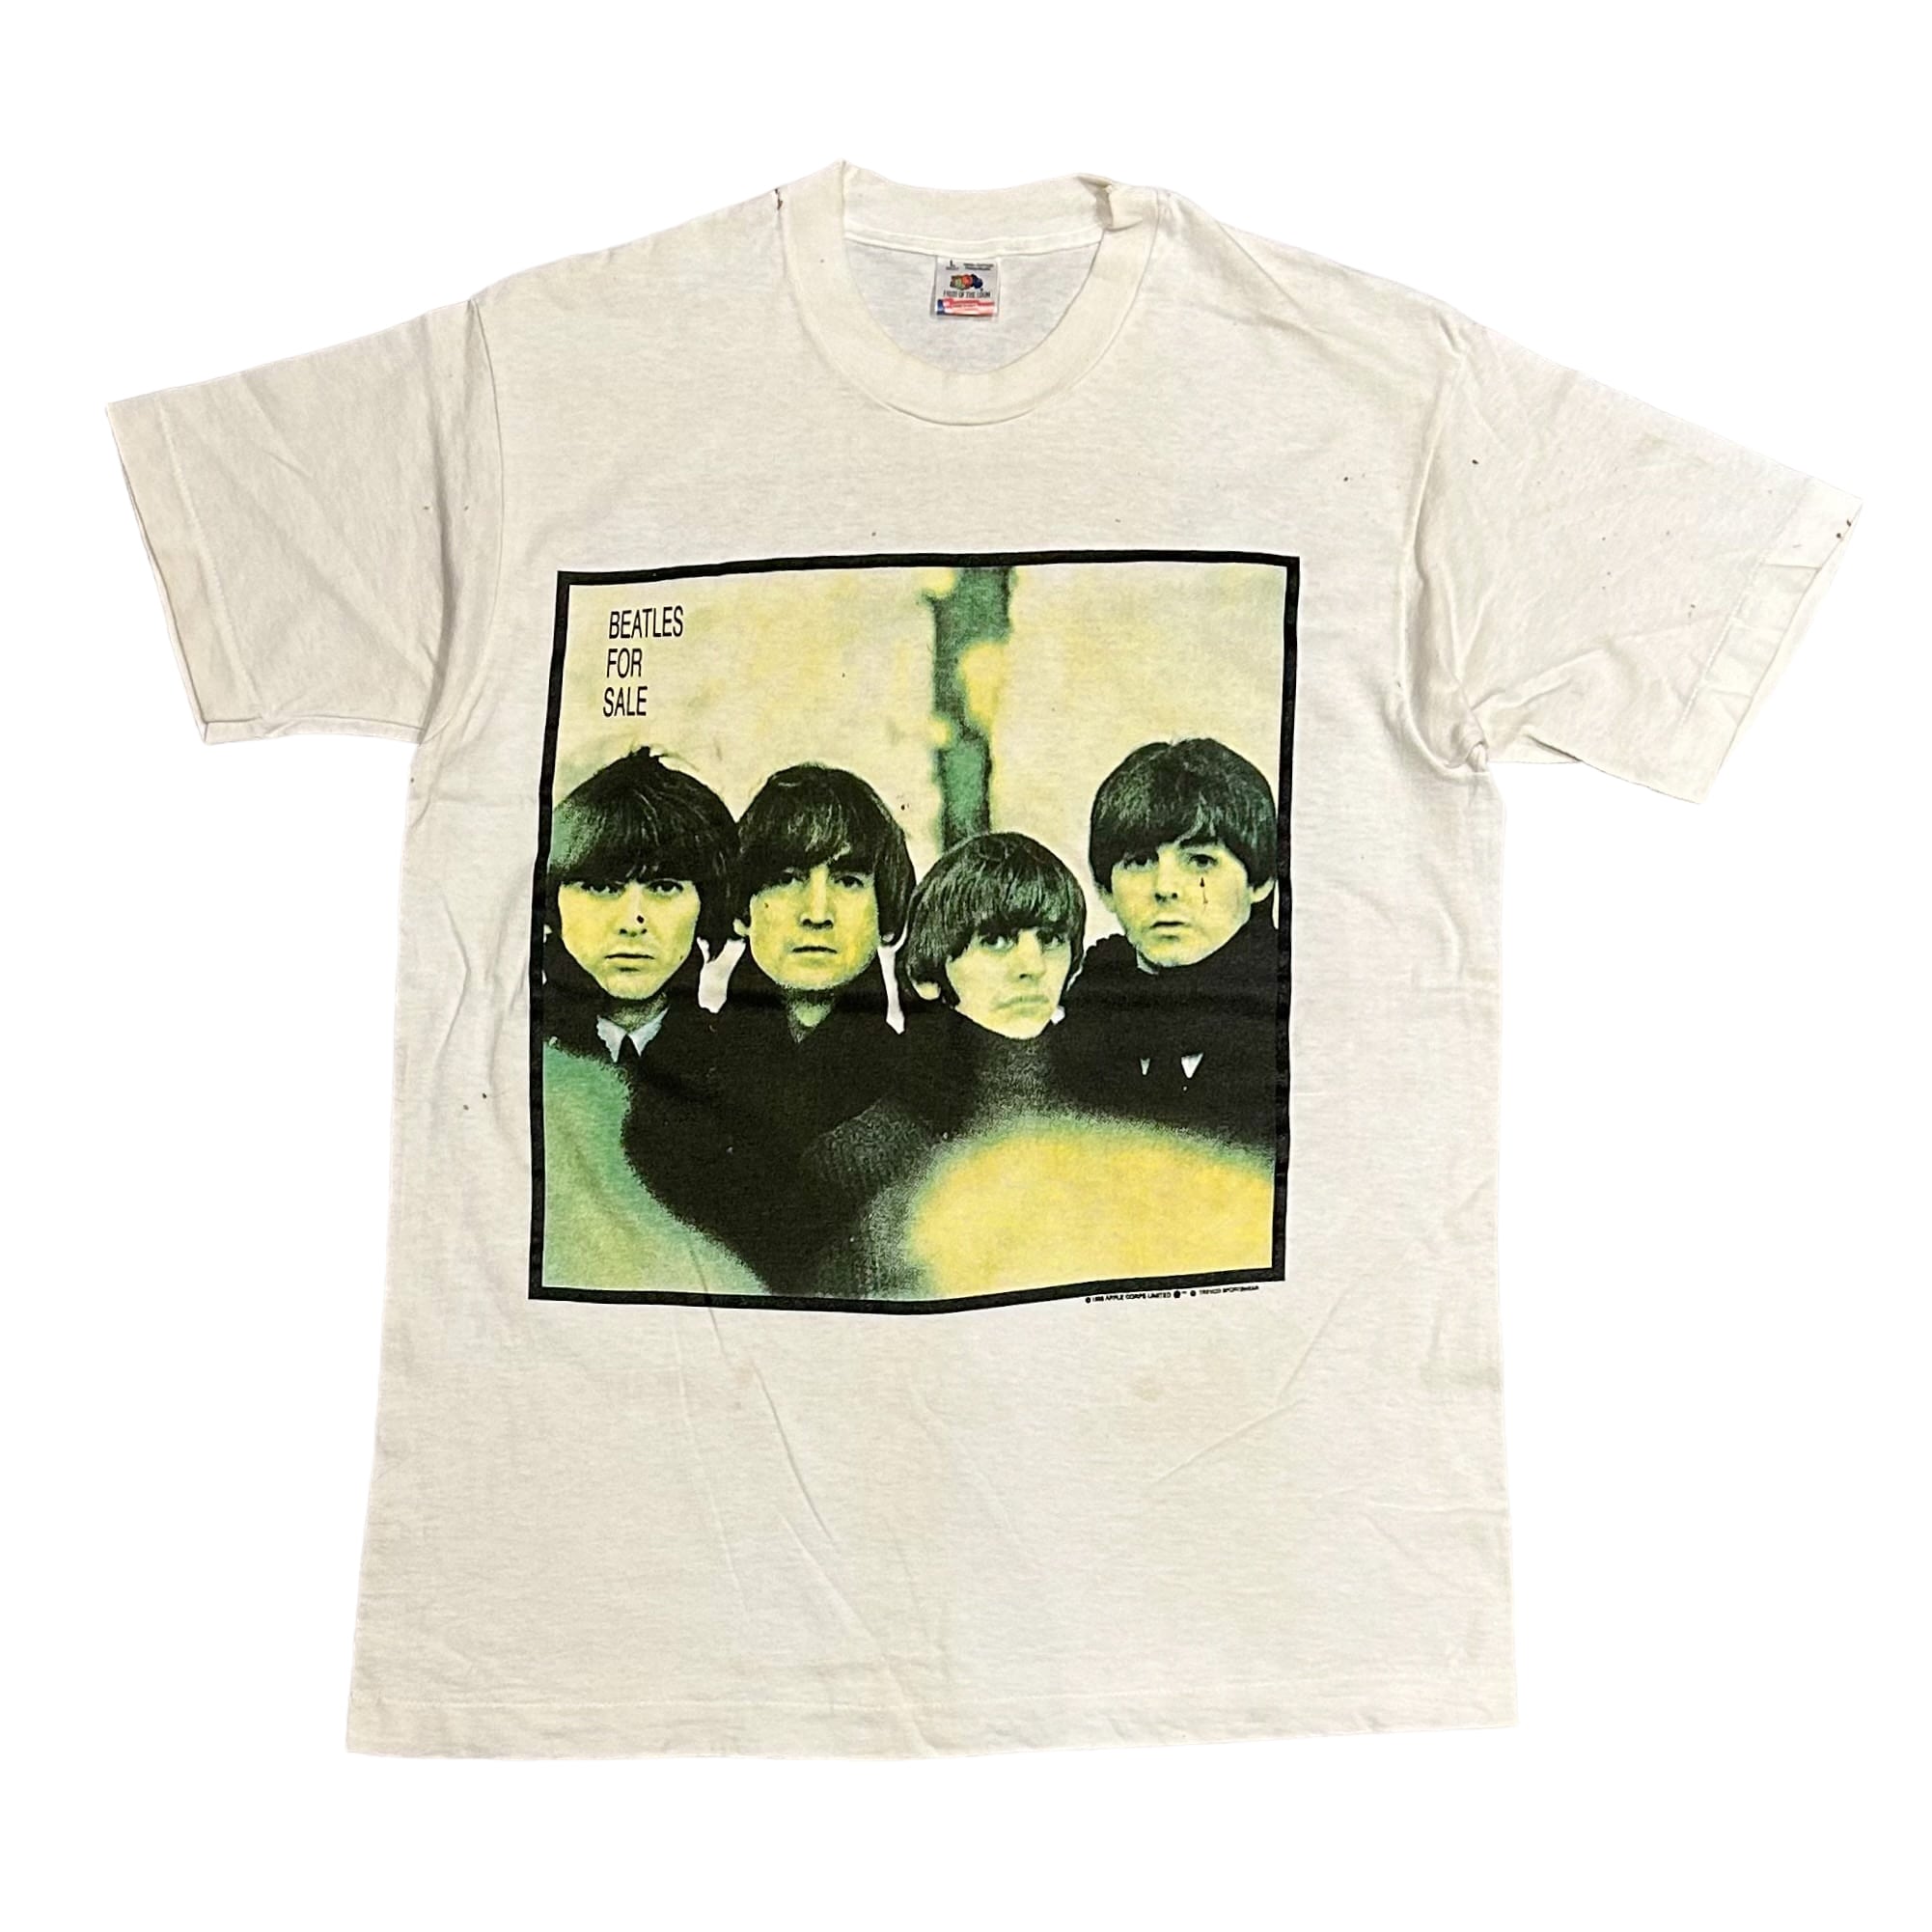 's USA製 The Beatles "Beatles For Sale" T Shirt L / ビートルズ バンドTシャツ 古着 ヴィンテージ